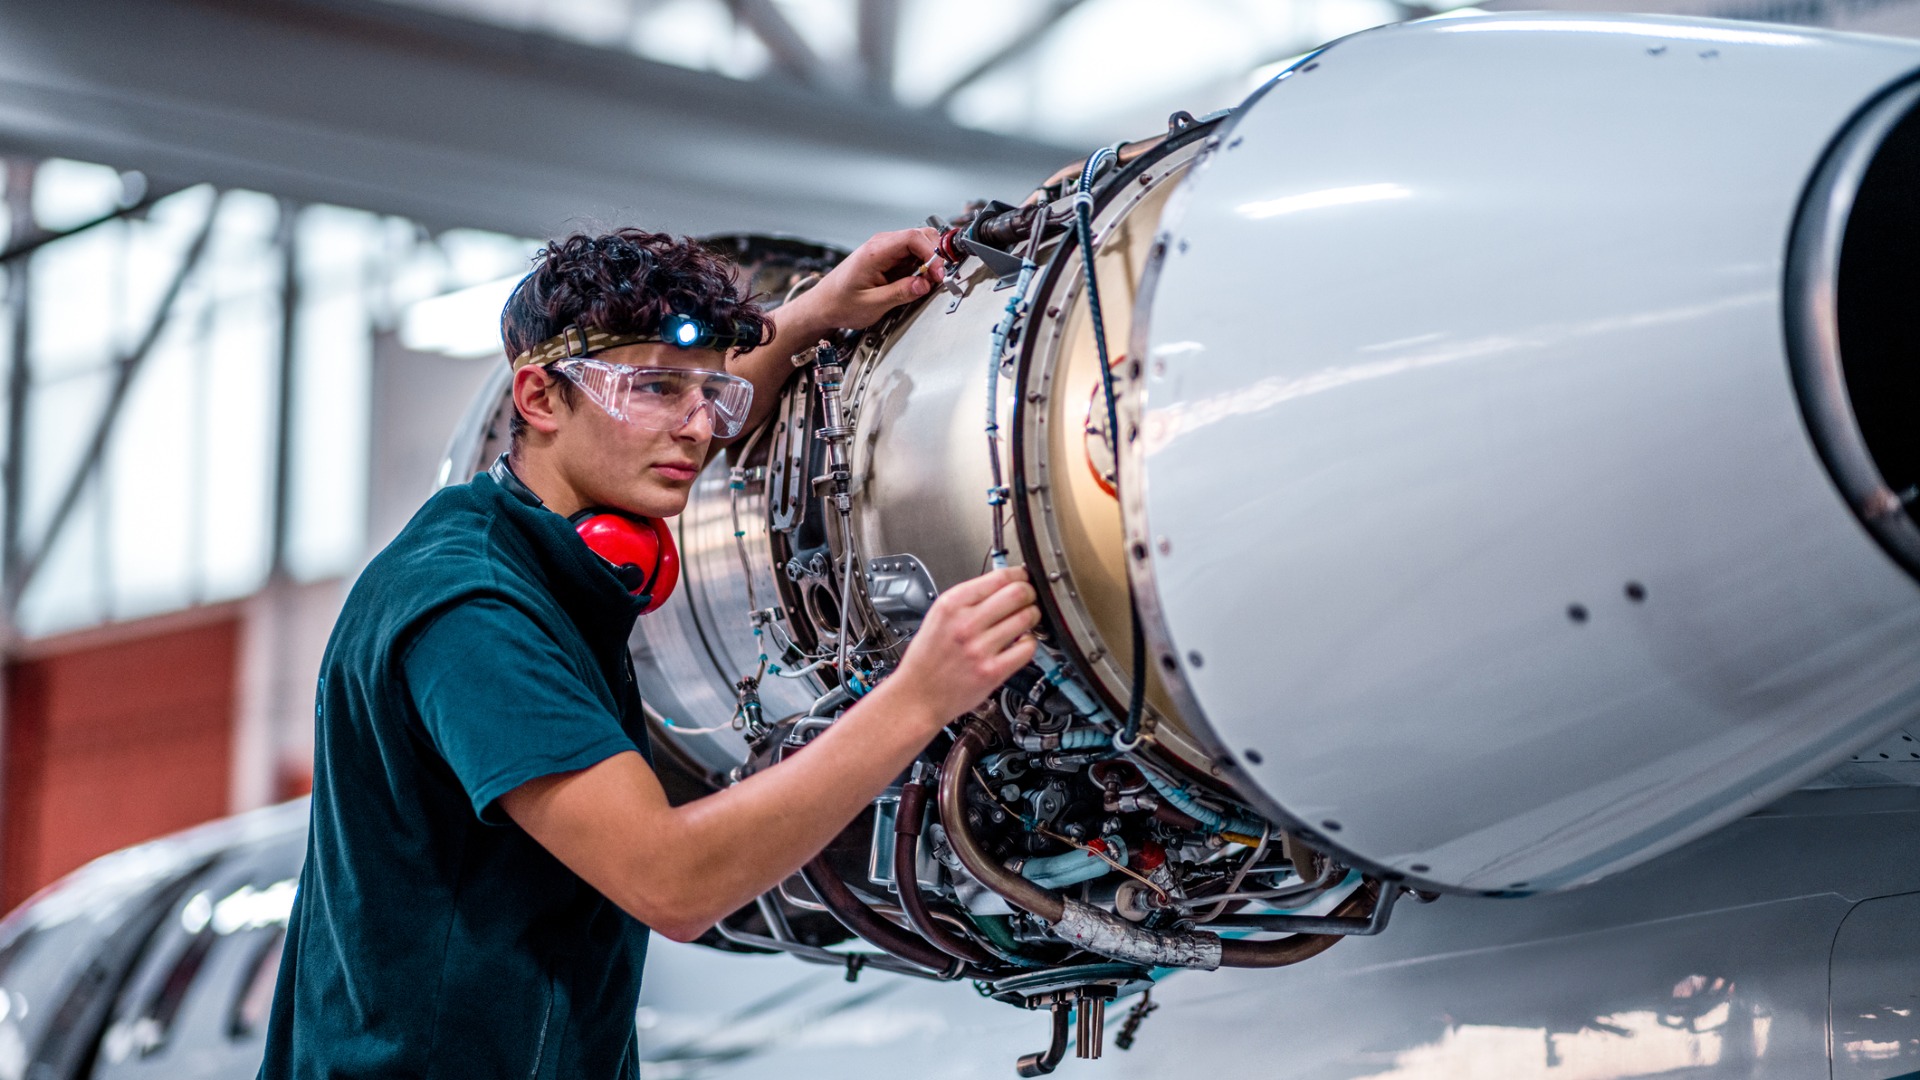 maintenance-mechanic-inspecting-the-jet-engine-picture-id1286754258